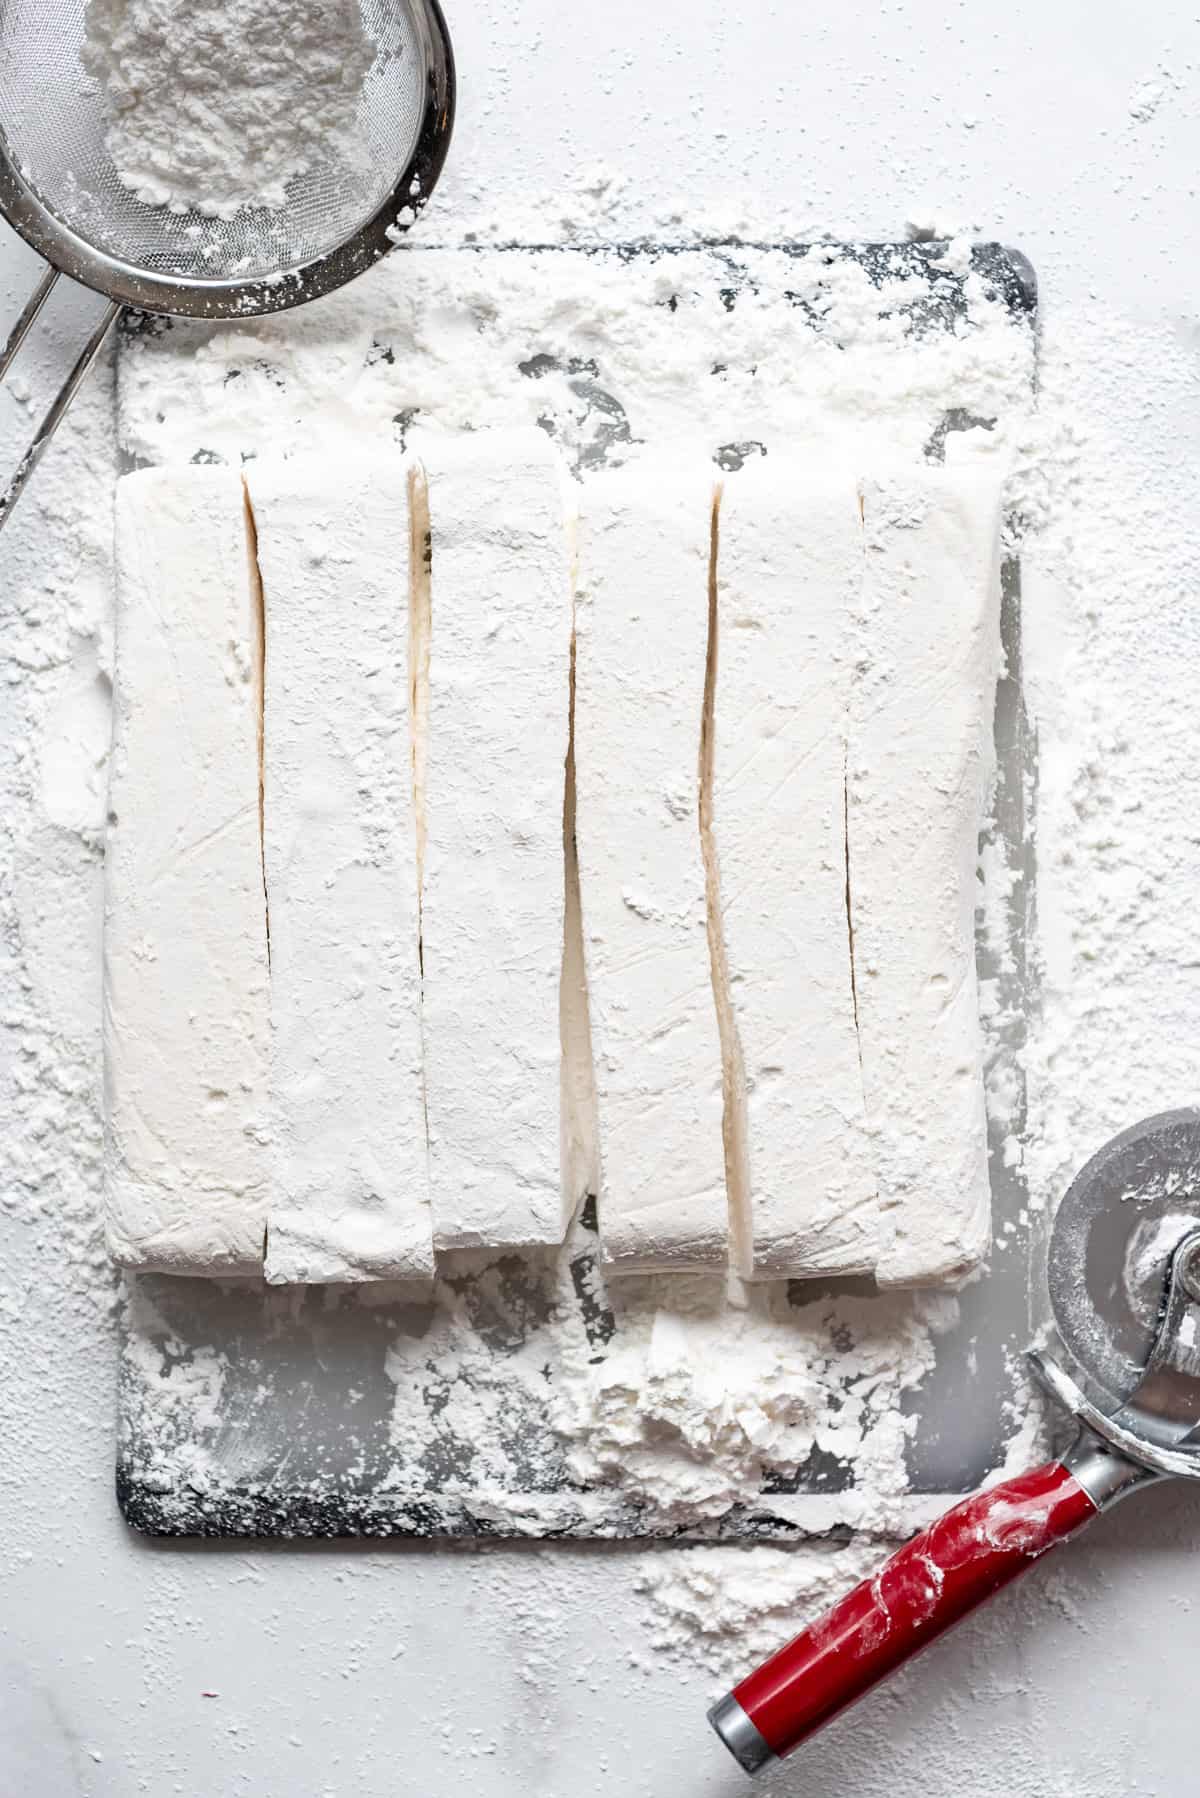 Six freshly cut rows of homemade marshmallow on a cutting board next to a pizza cutter and fine mesh sieve with powdered sugar and cornstarch.